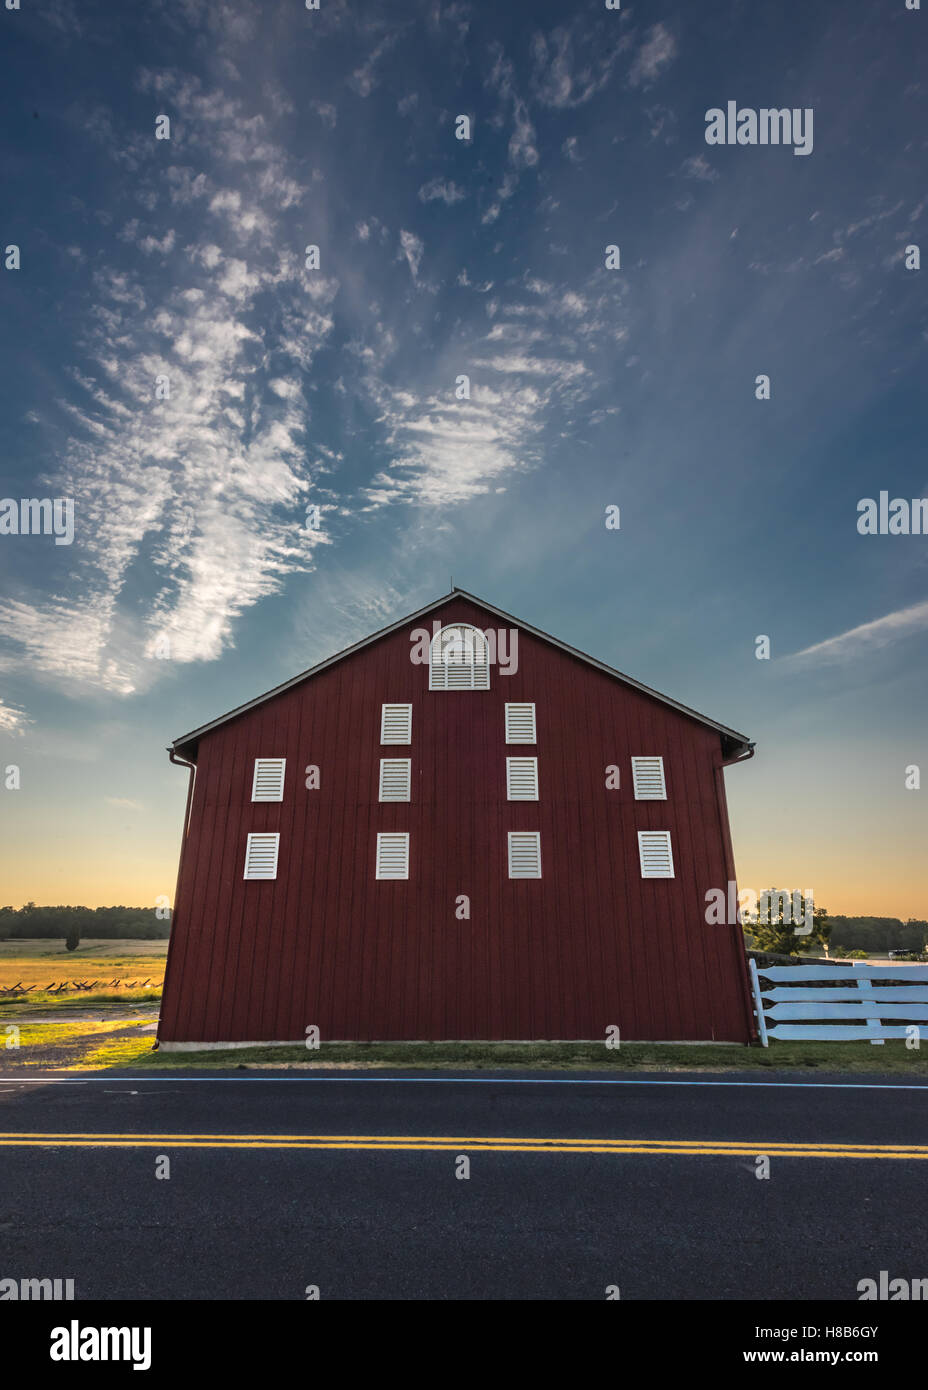 Cloudy Sunset Sky Above Red Barn Towering Over Road Stock Photo